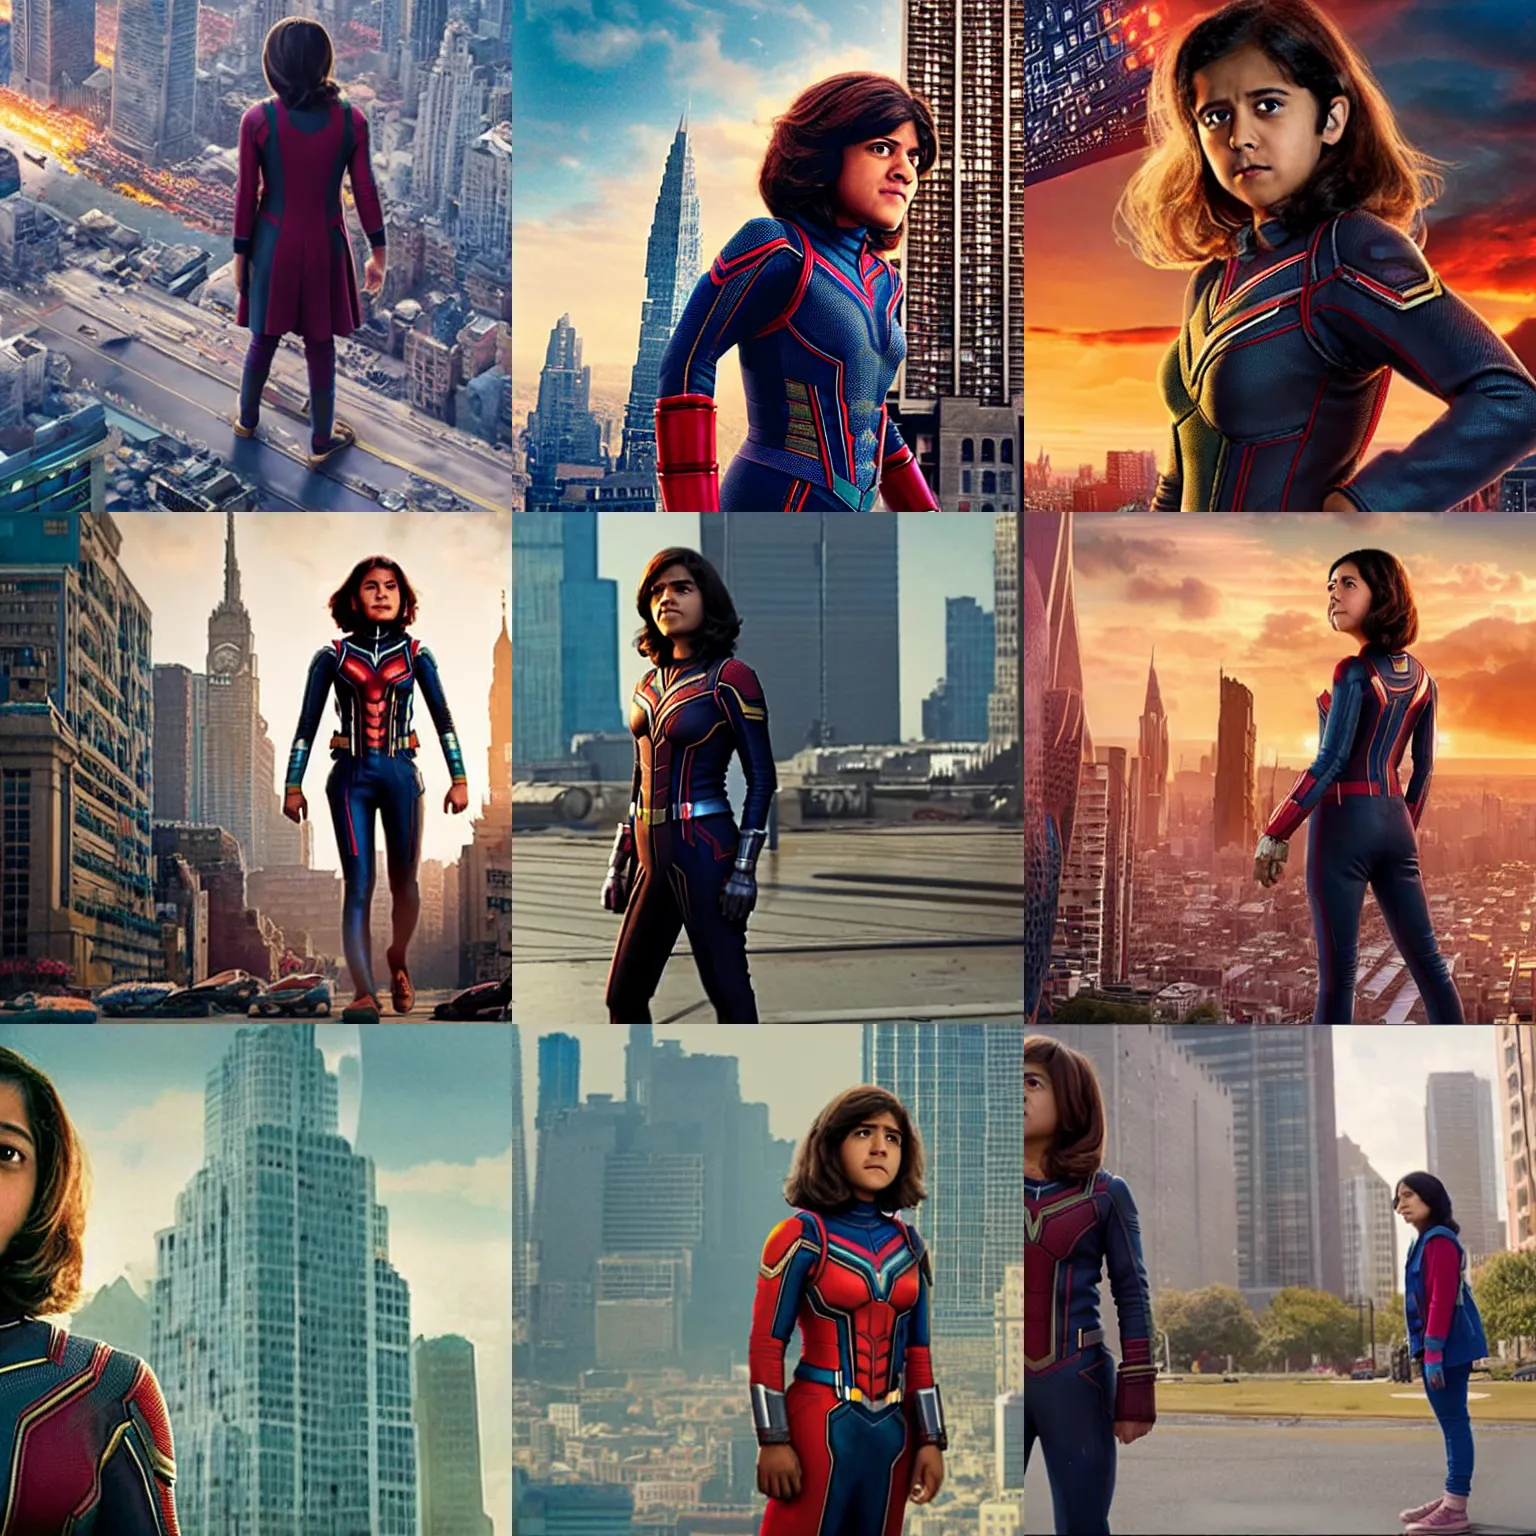 Prompt: Kamala Khan grows to an enormous size and towers over a city, film still from 'Ant-Man and the Wasp'